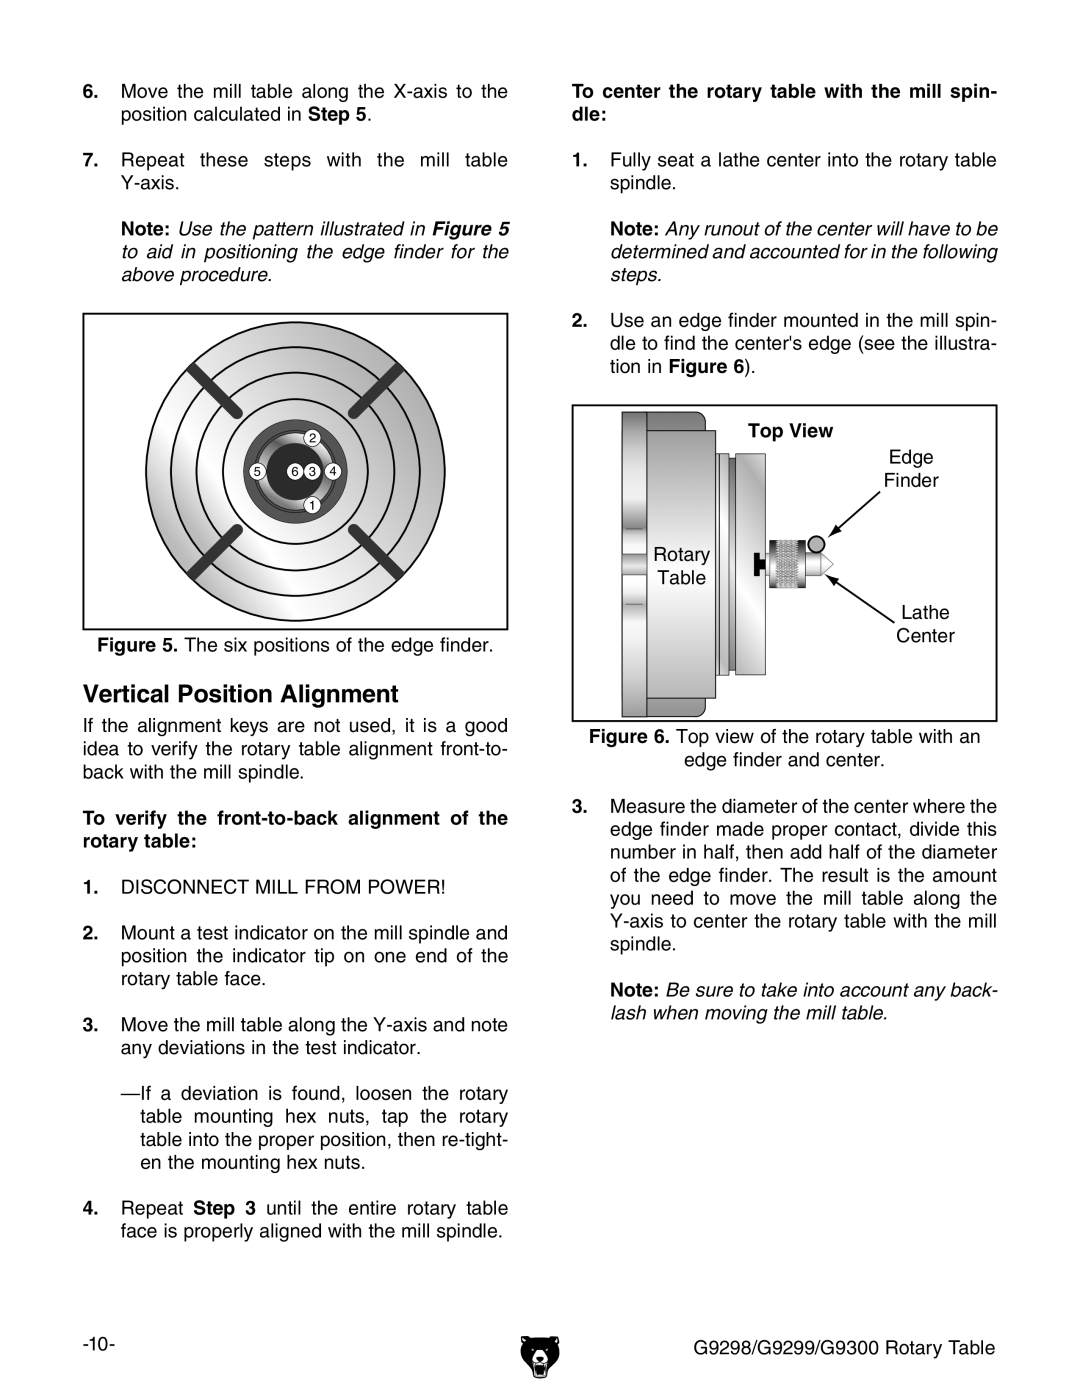 Grizzly G9298 owner manual Vertical Position Alignment, To verify the front-to-back alignment of the rotary table, Top View 